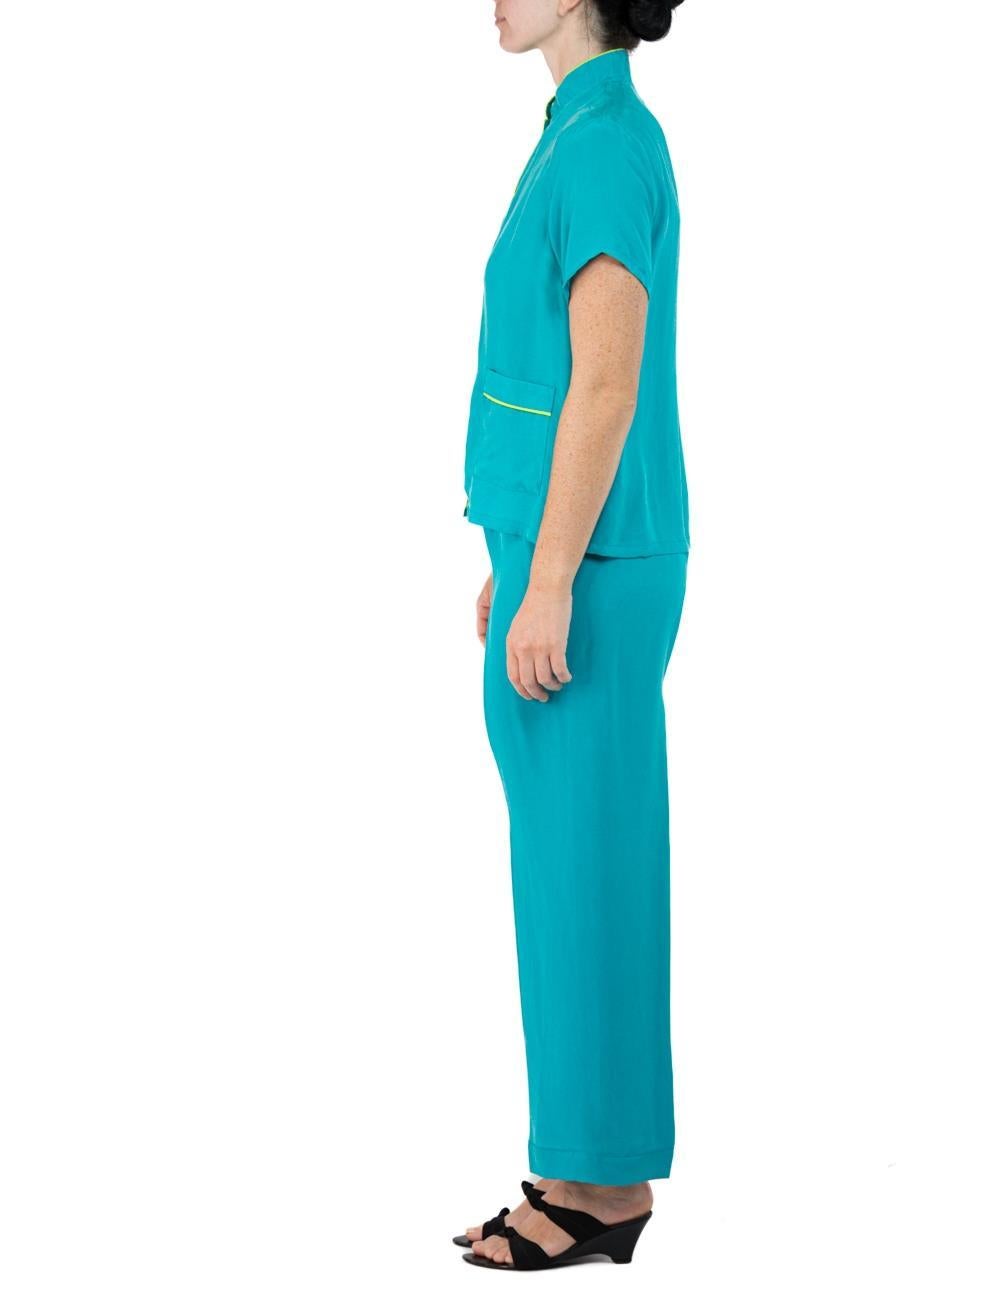 Morphew Collection Teal & Neon Yellow Trim Cold Rayon Bias Pajamas Master Medium
MORPHEW COLLECTION is made entirely by hand in our NYC Ateliér of rare antique materials sourced from around the globe. Our sustainable vintage materials represent over